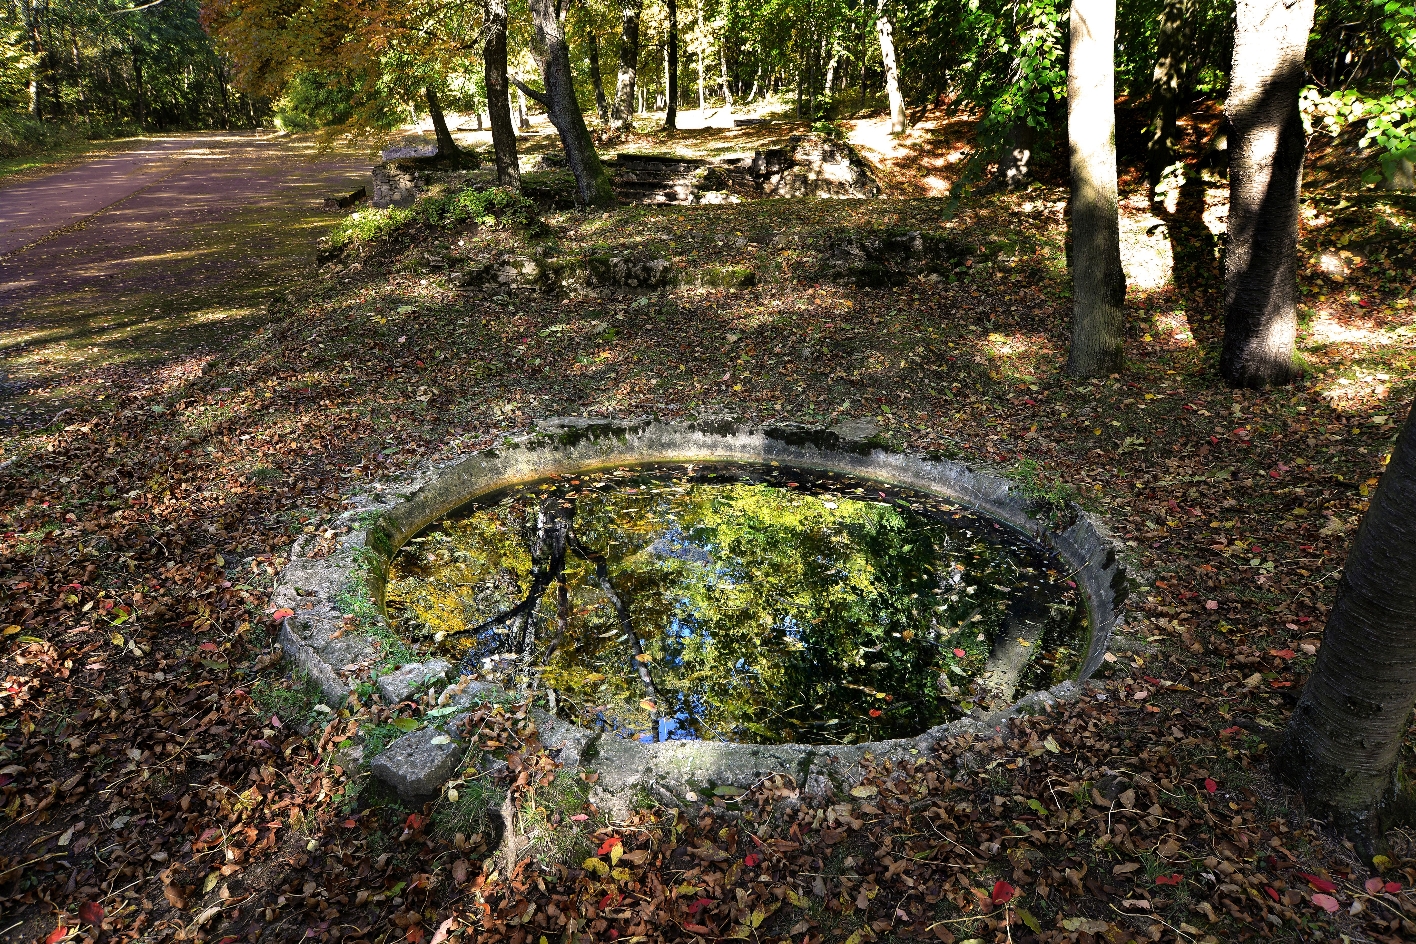 A small, rusty fountain set in a pool of water set into the ground with a stone border. The basin stands in an autumnal forest.